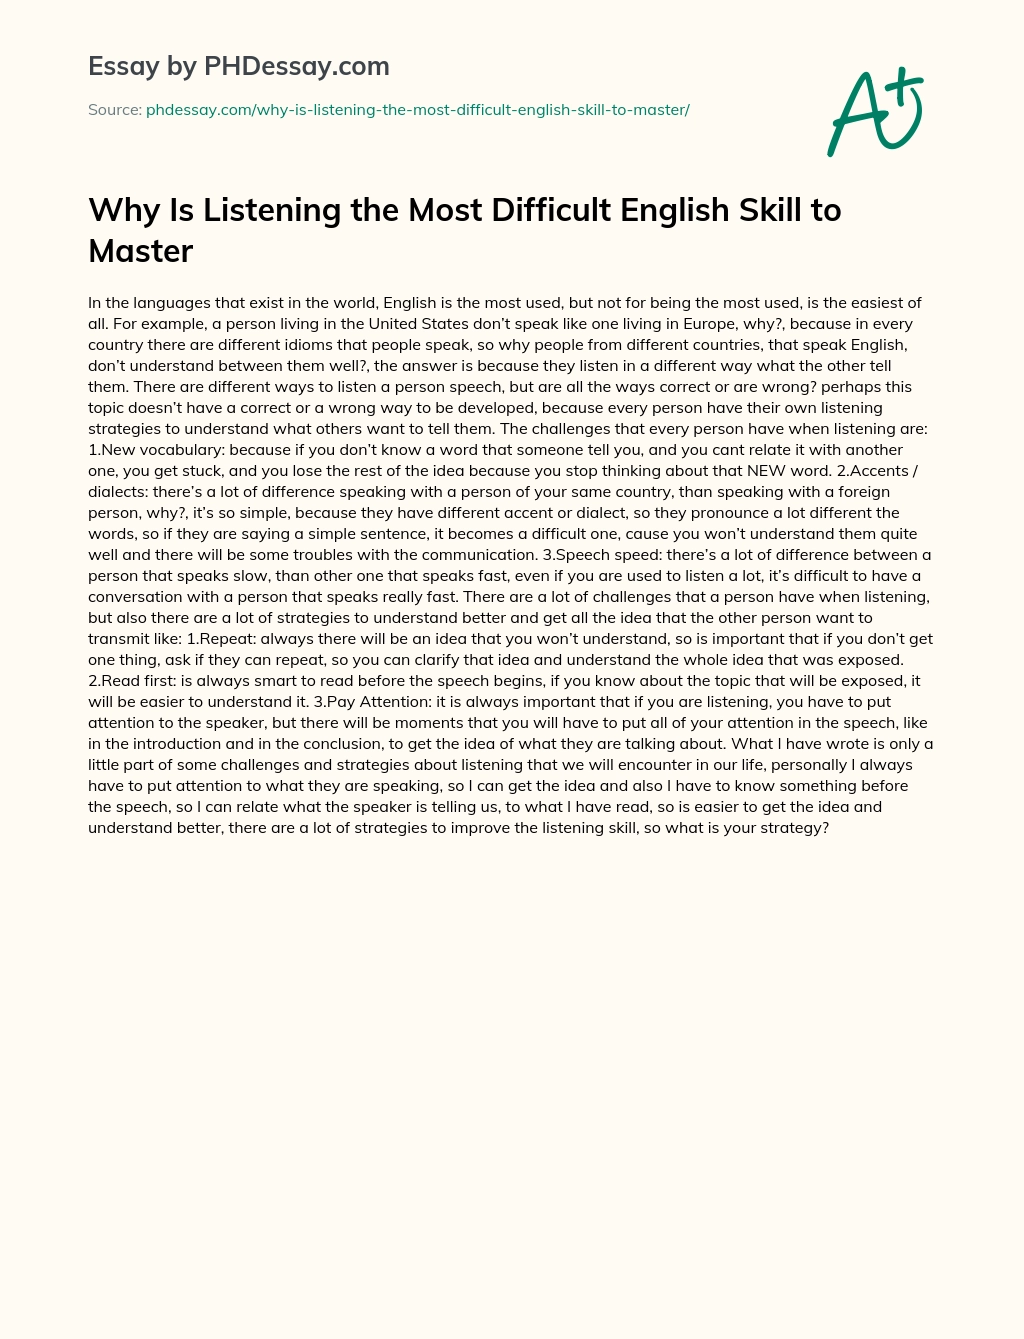 Why Is Listening the Most Difficult English Skill to Master essay